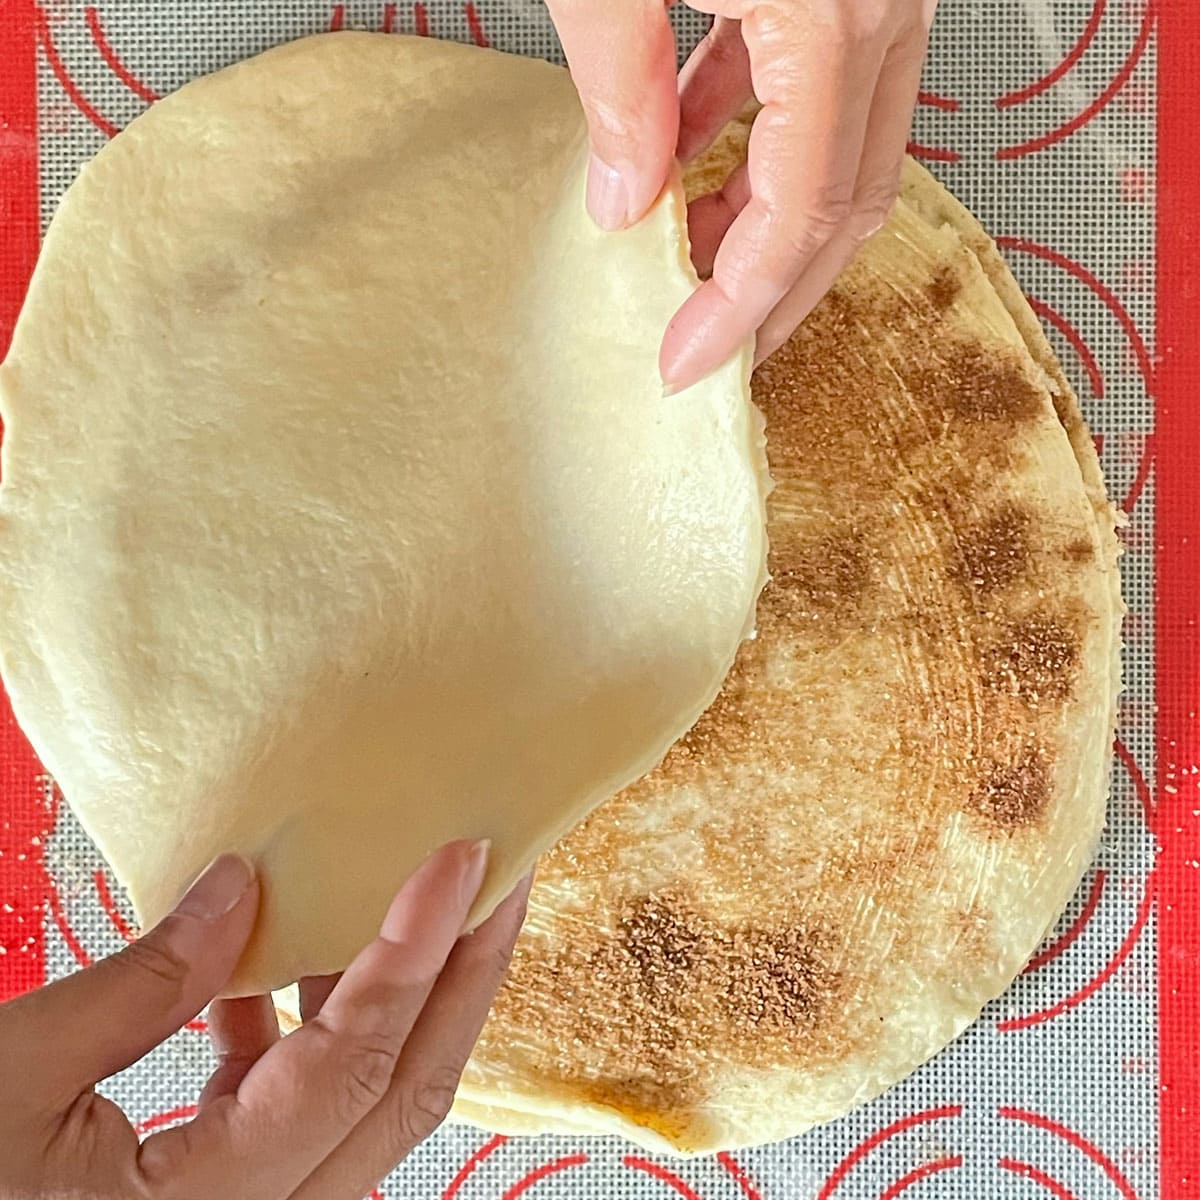 Layer rolled dough.